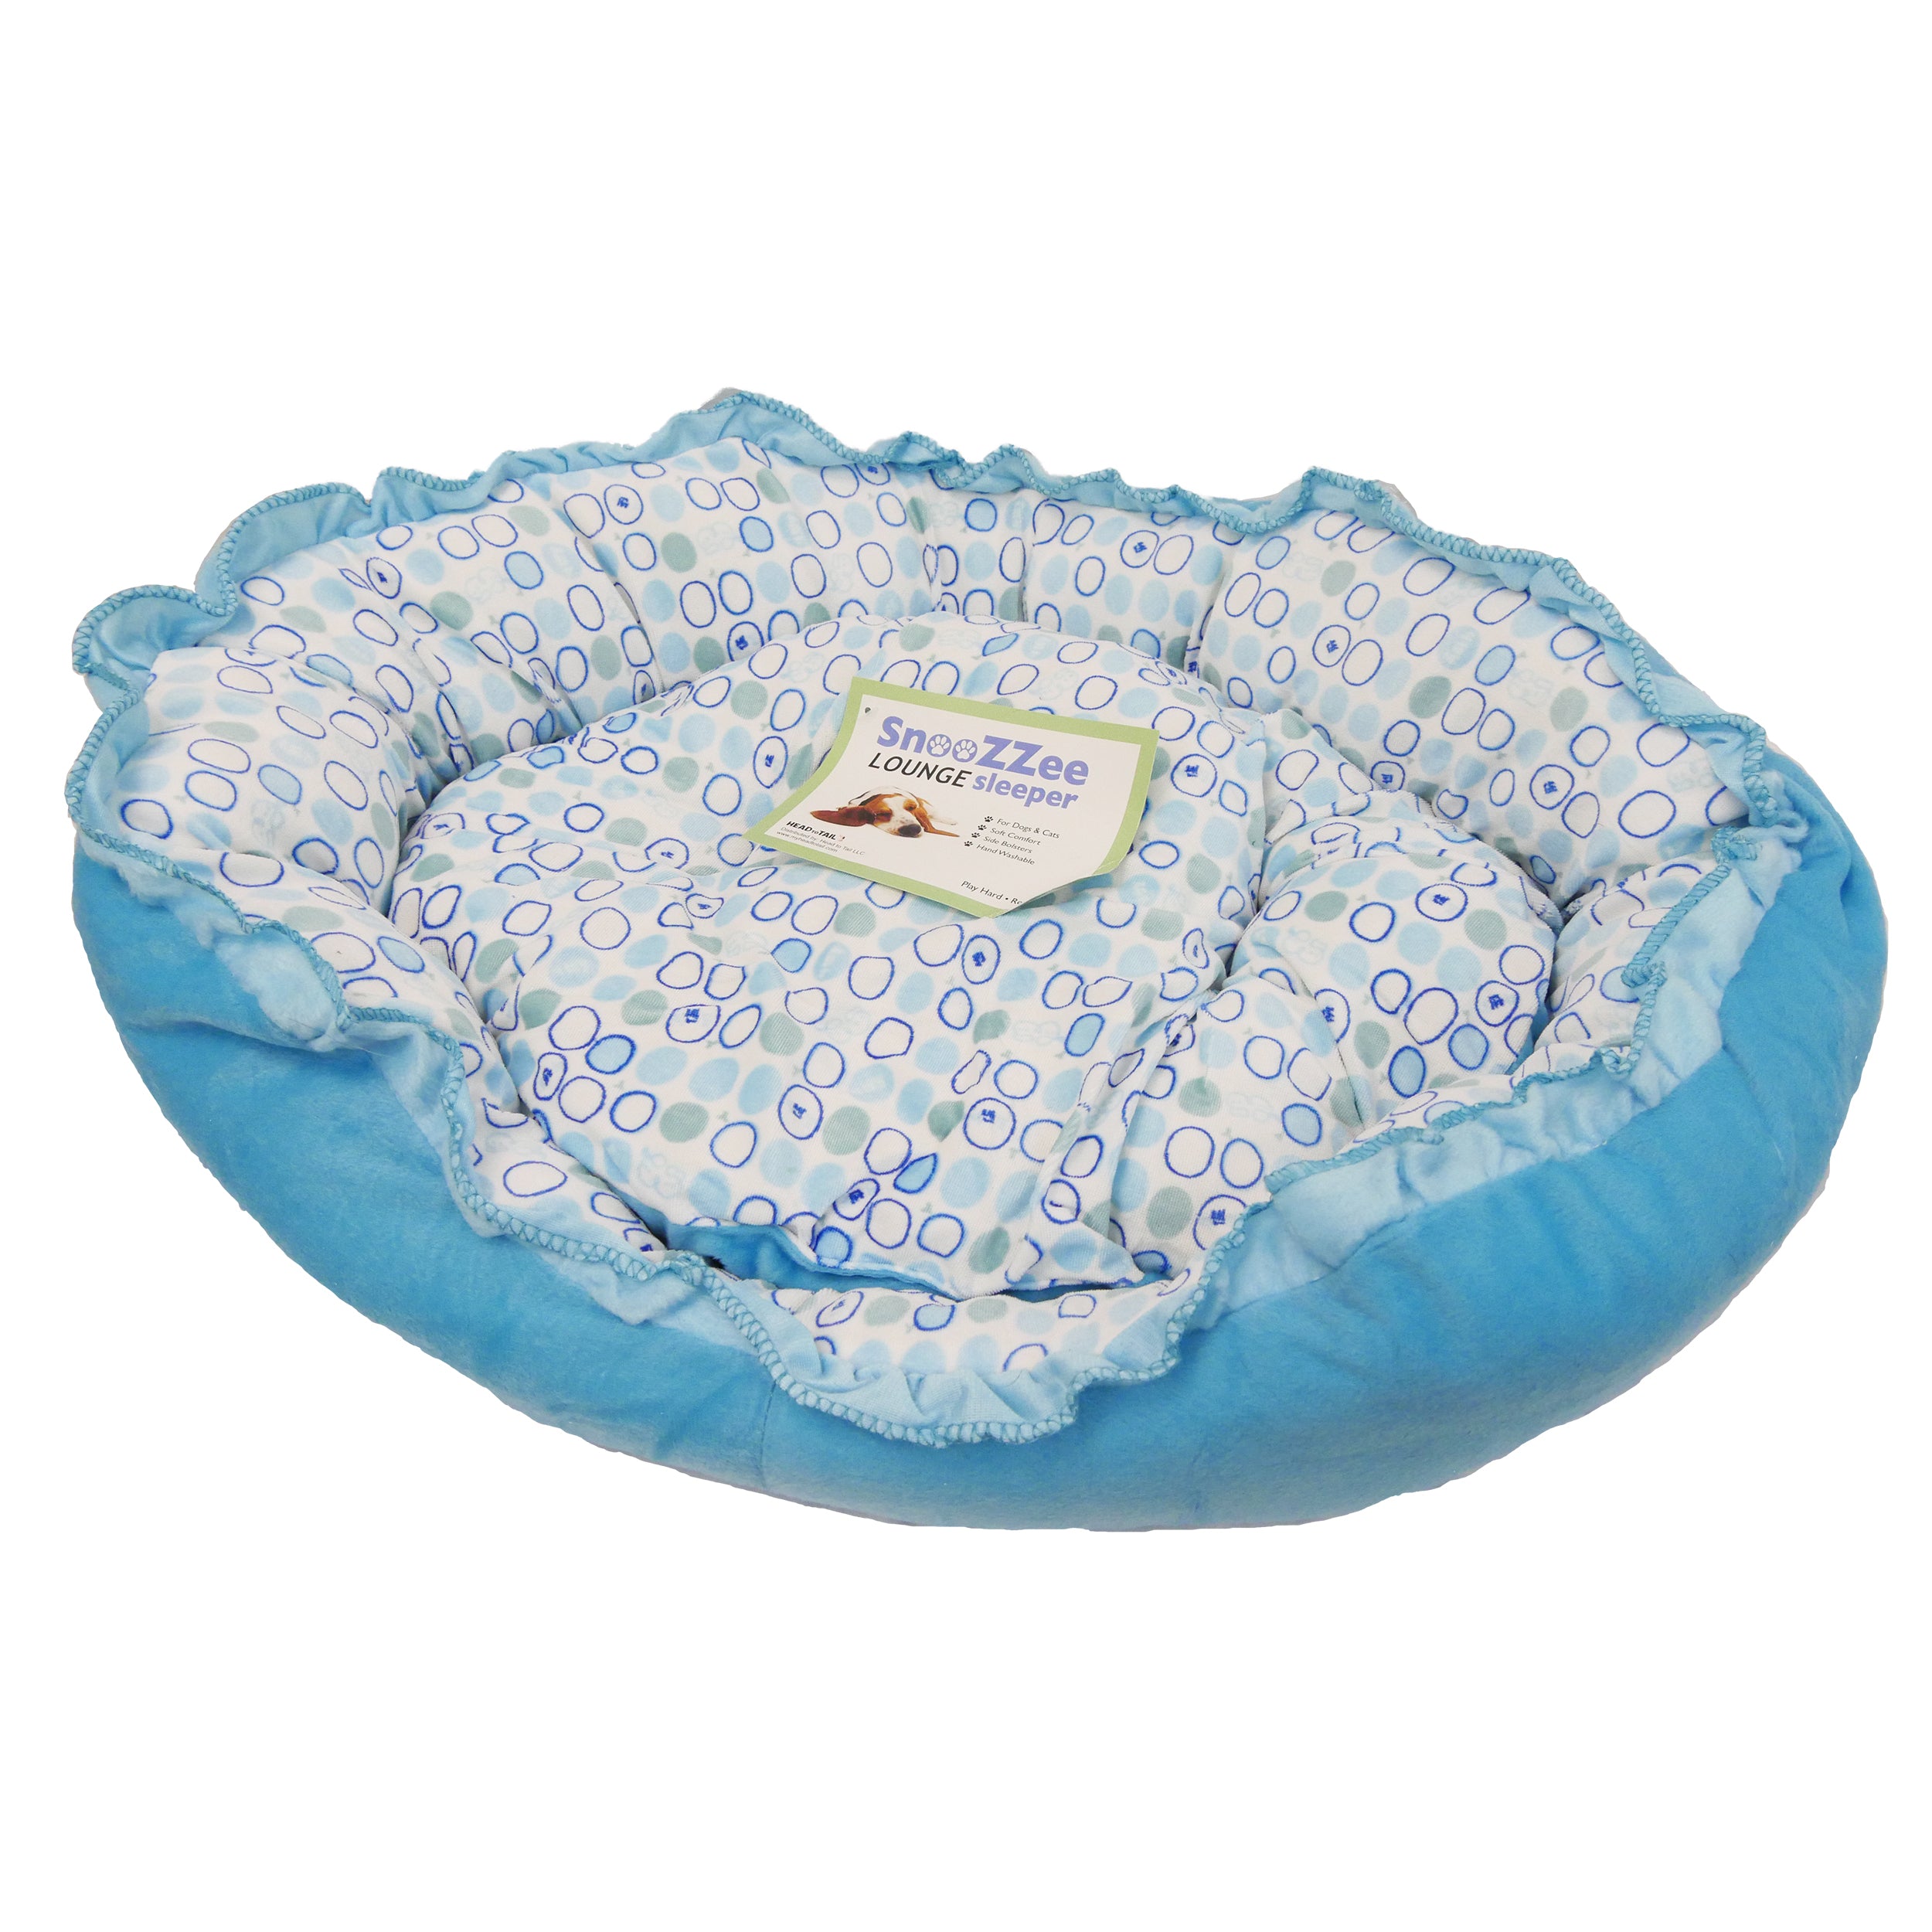 [Dog bed] 3-color Patterned Cushioned Pet Beds